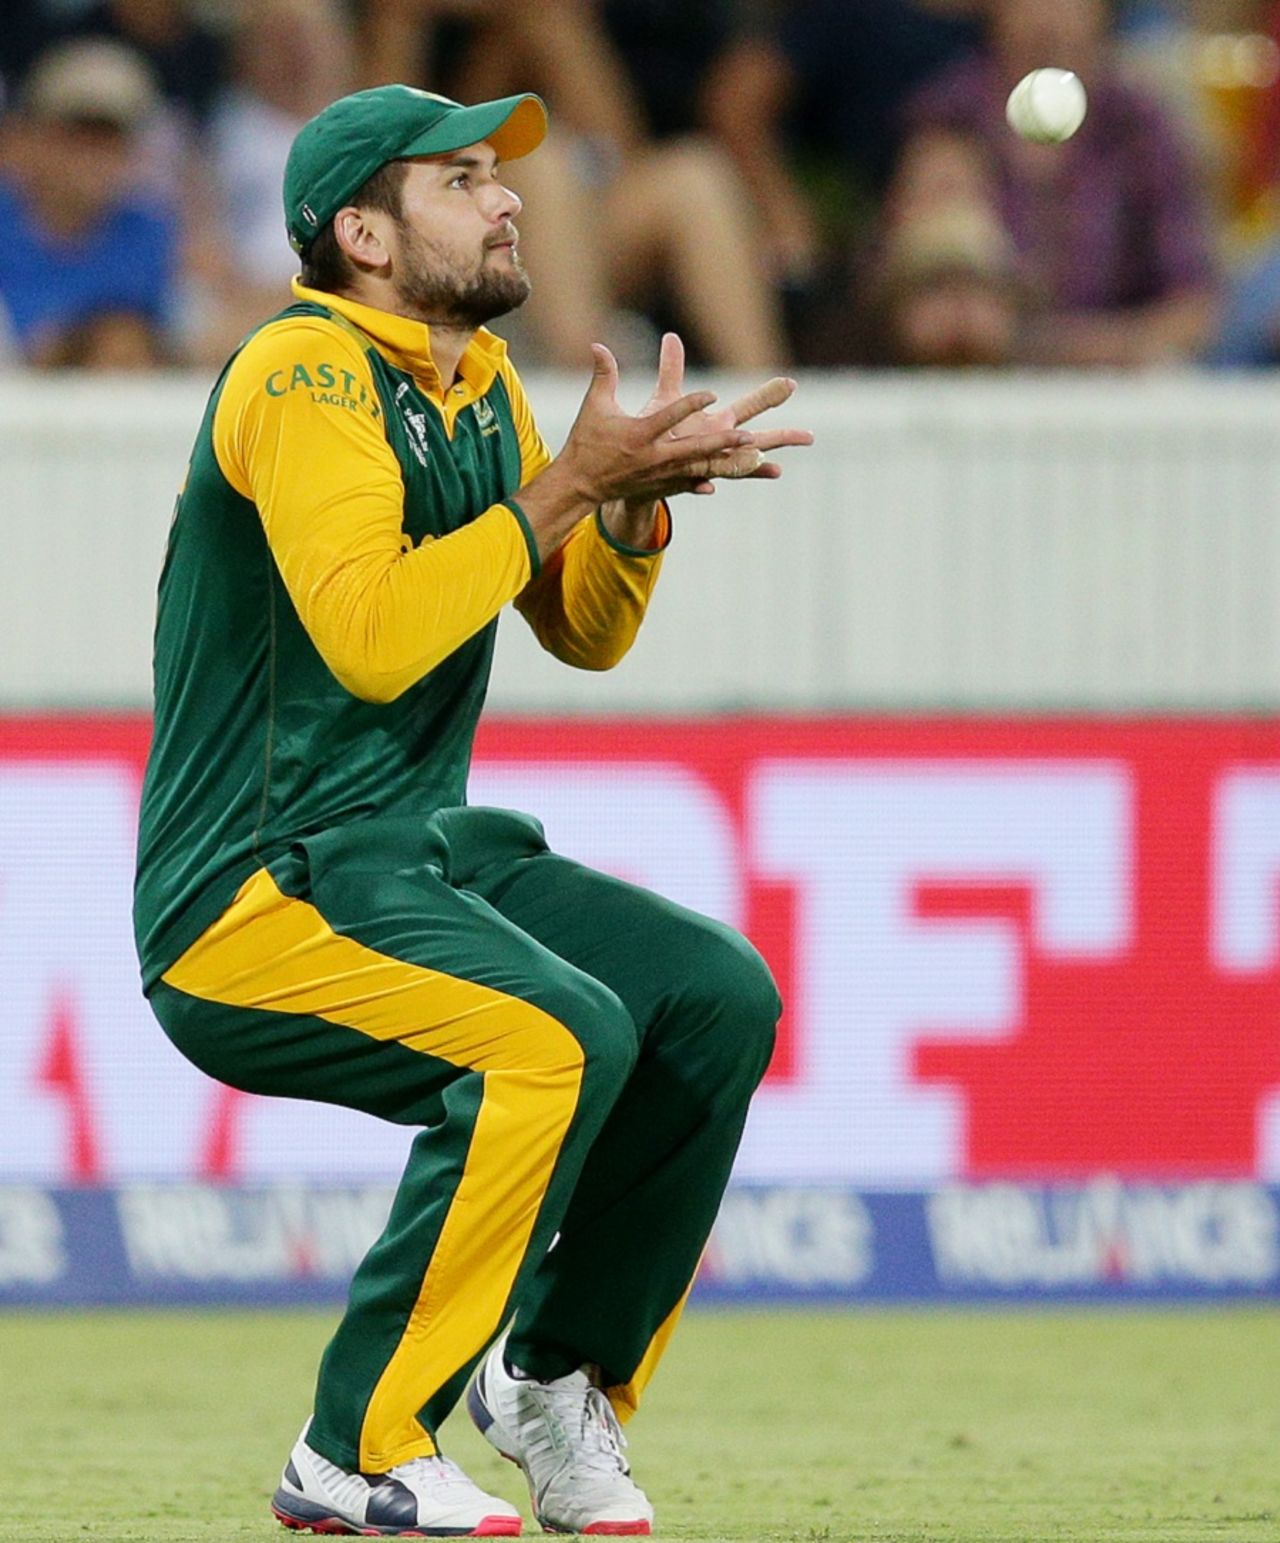 Rilee Rossouw takes the catch to dismiss Andy Balbirne,  Ireland v South Africa, World Cup 2015, Group B, Canberra, March 3, 2015